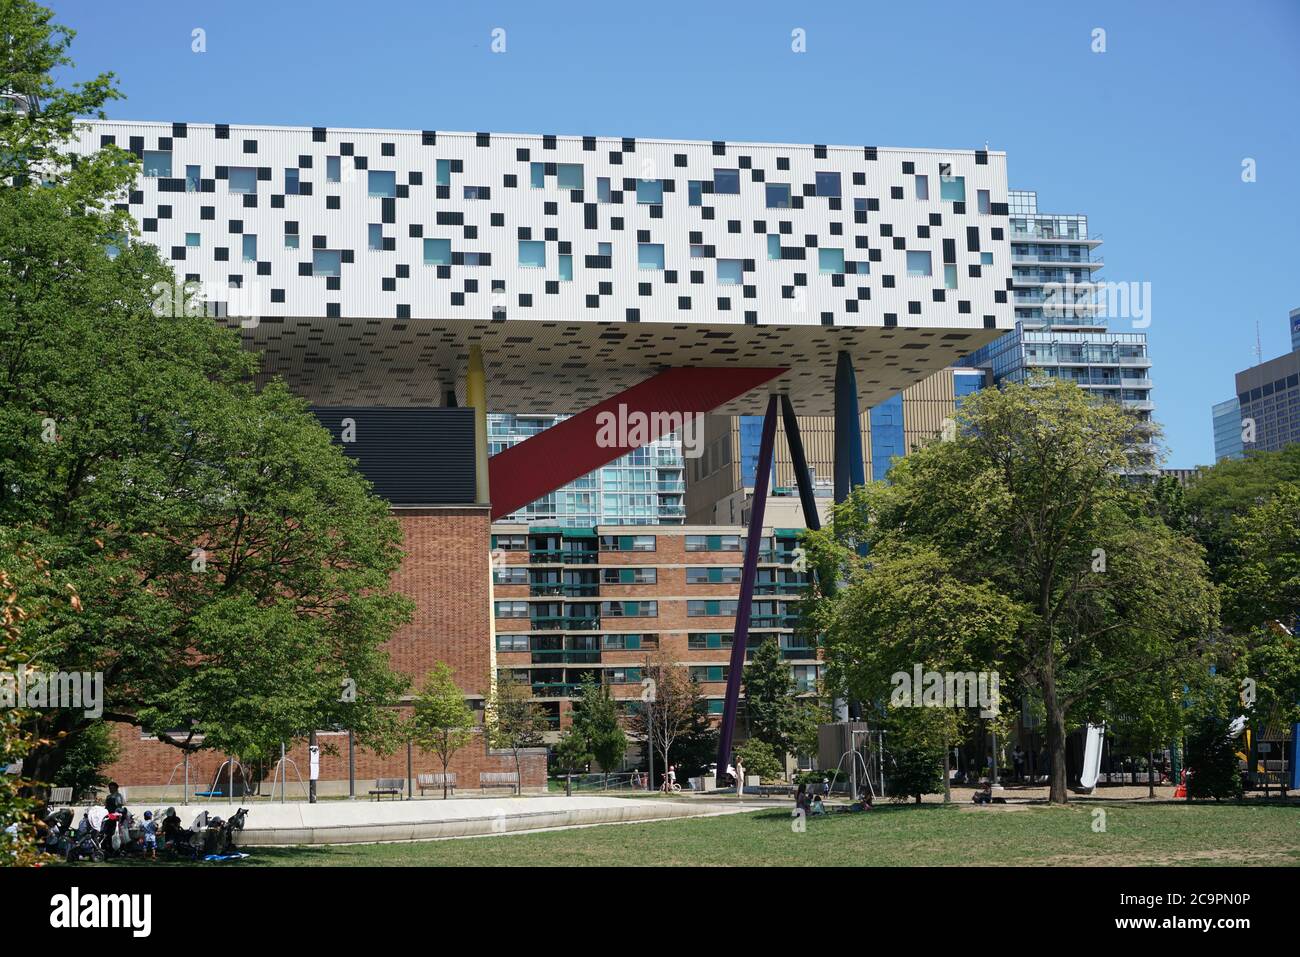 Toronto, Canada - July 31, 2020: Grange Park and the Ontario College of Art and Design in the background Stock Photo